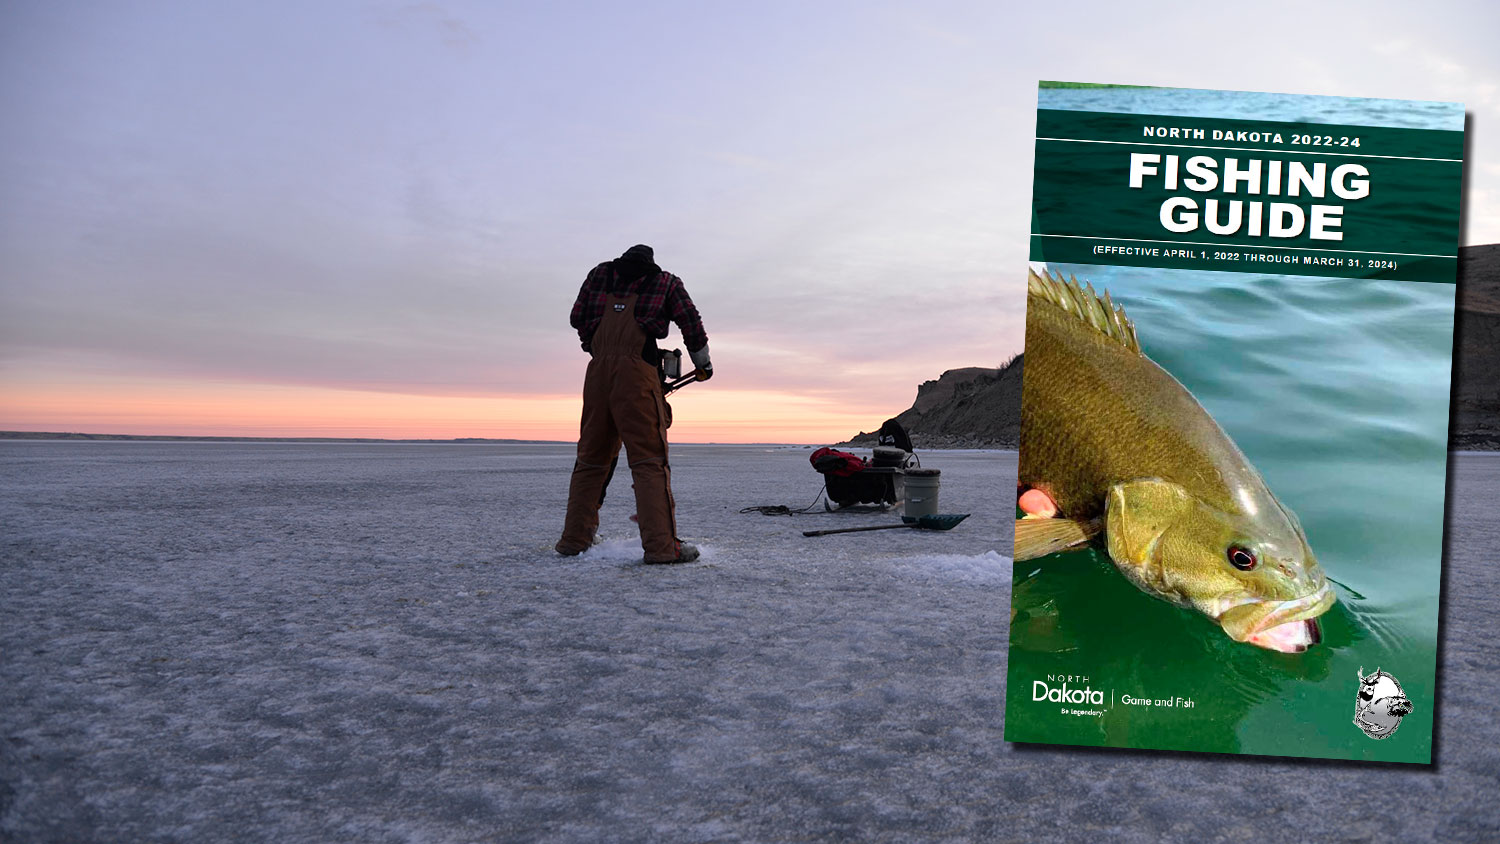 Woman fishing with guide cover superimposed